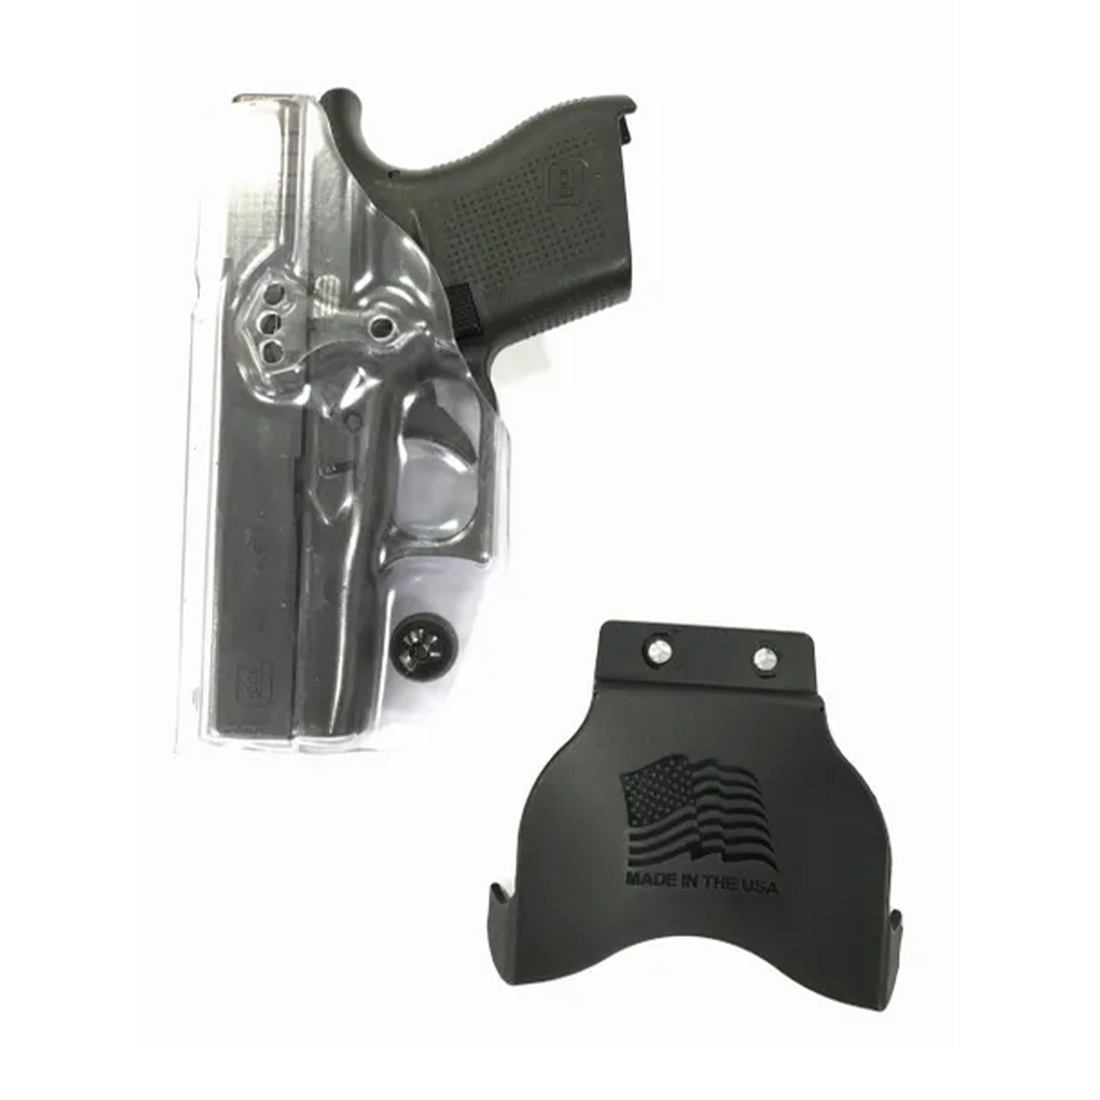 Polymer 80 OWB Paddle Holsters